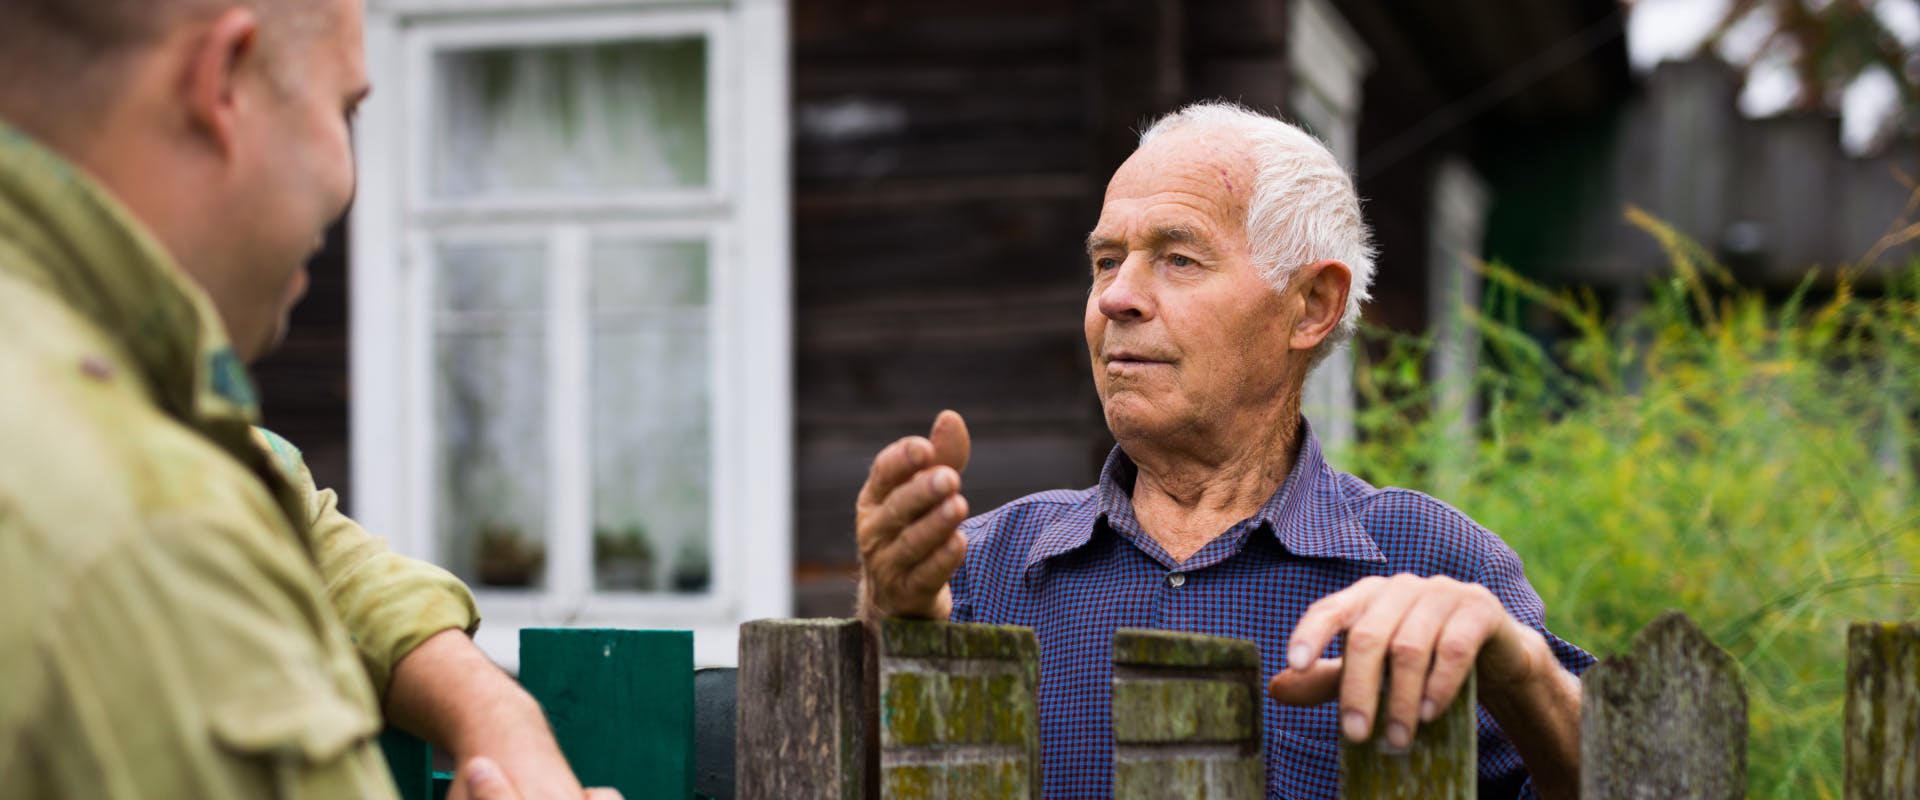 two men talking over a wooden fence who are part of the local rural communities